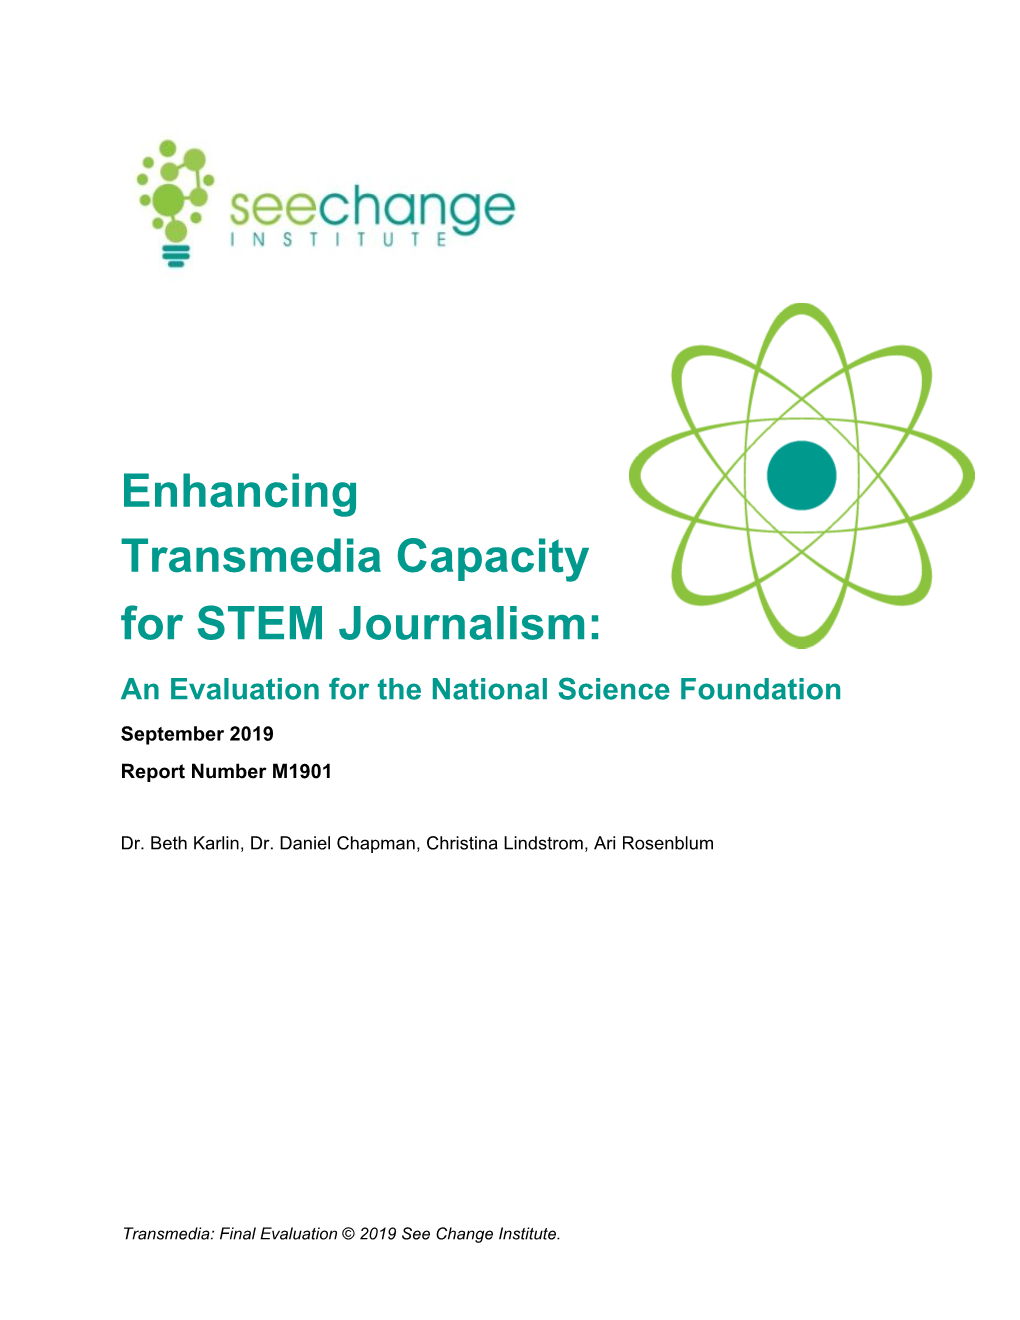 Enhancing Transmedia Capacity for STEM Journalism: an Evaluation for the National Science Foundation September 2019 Report Number M1901